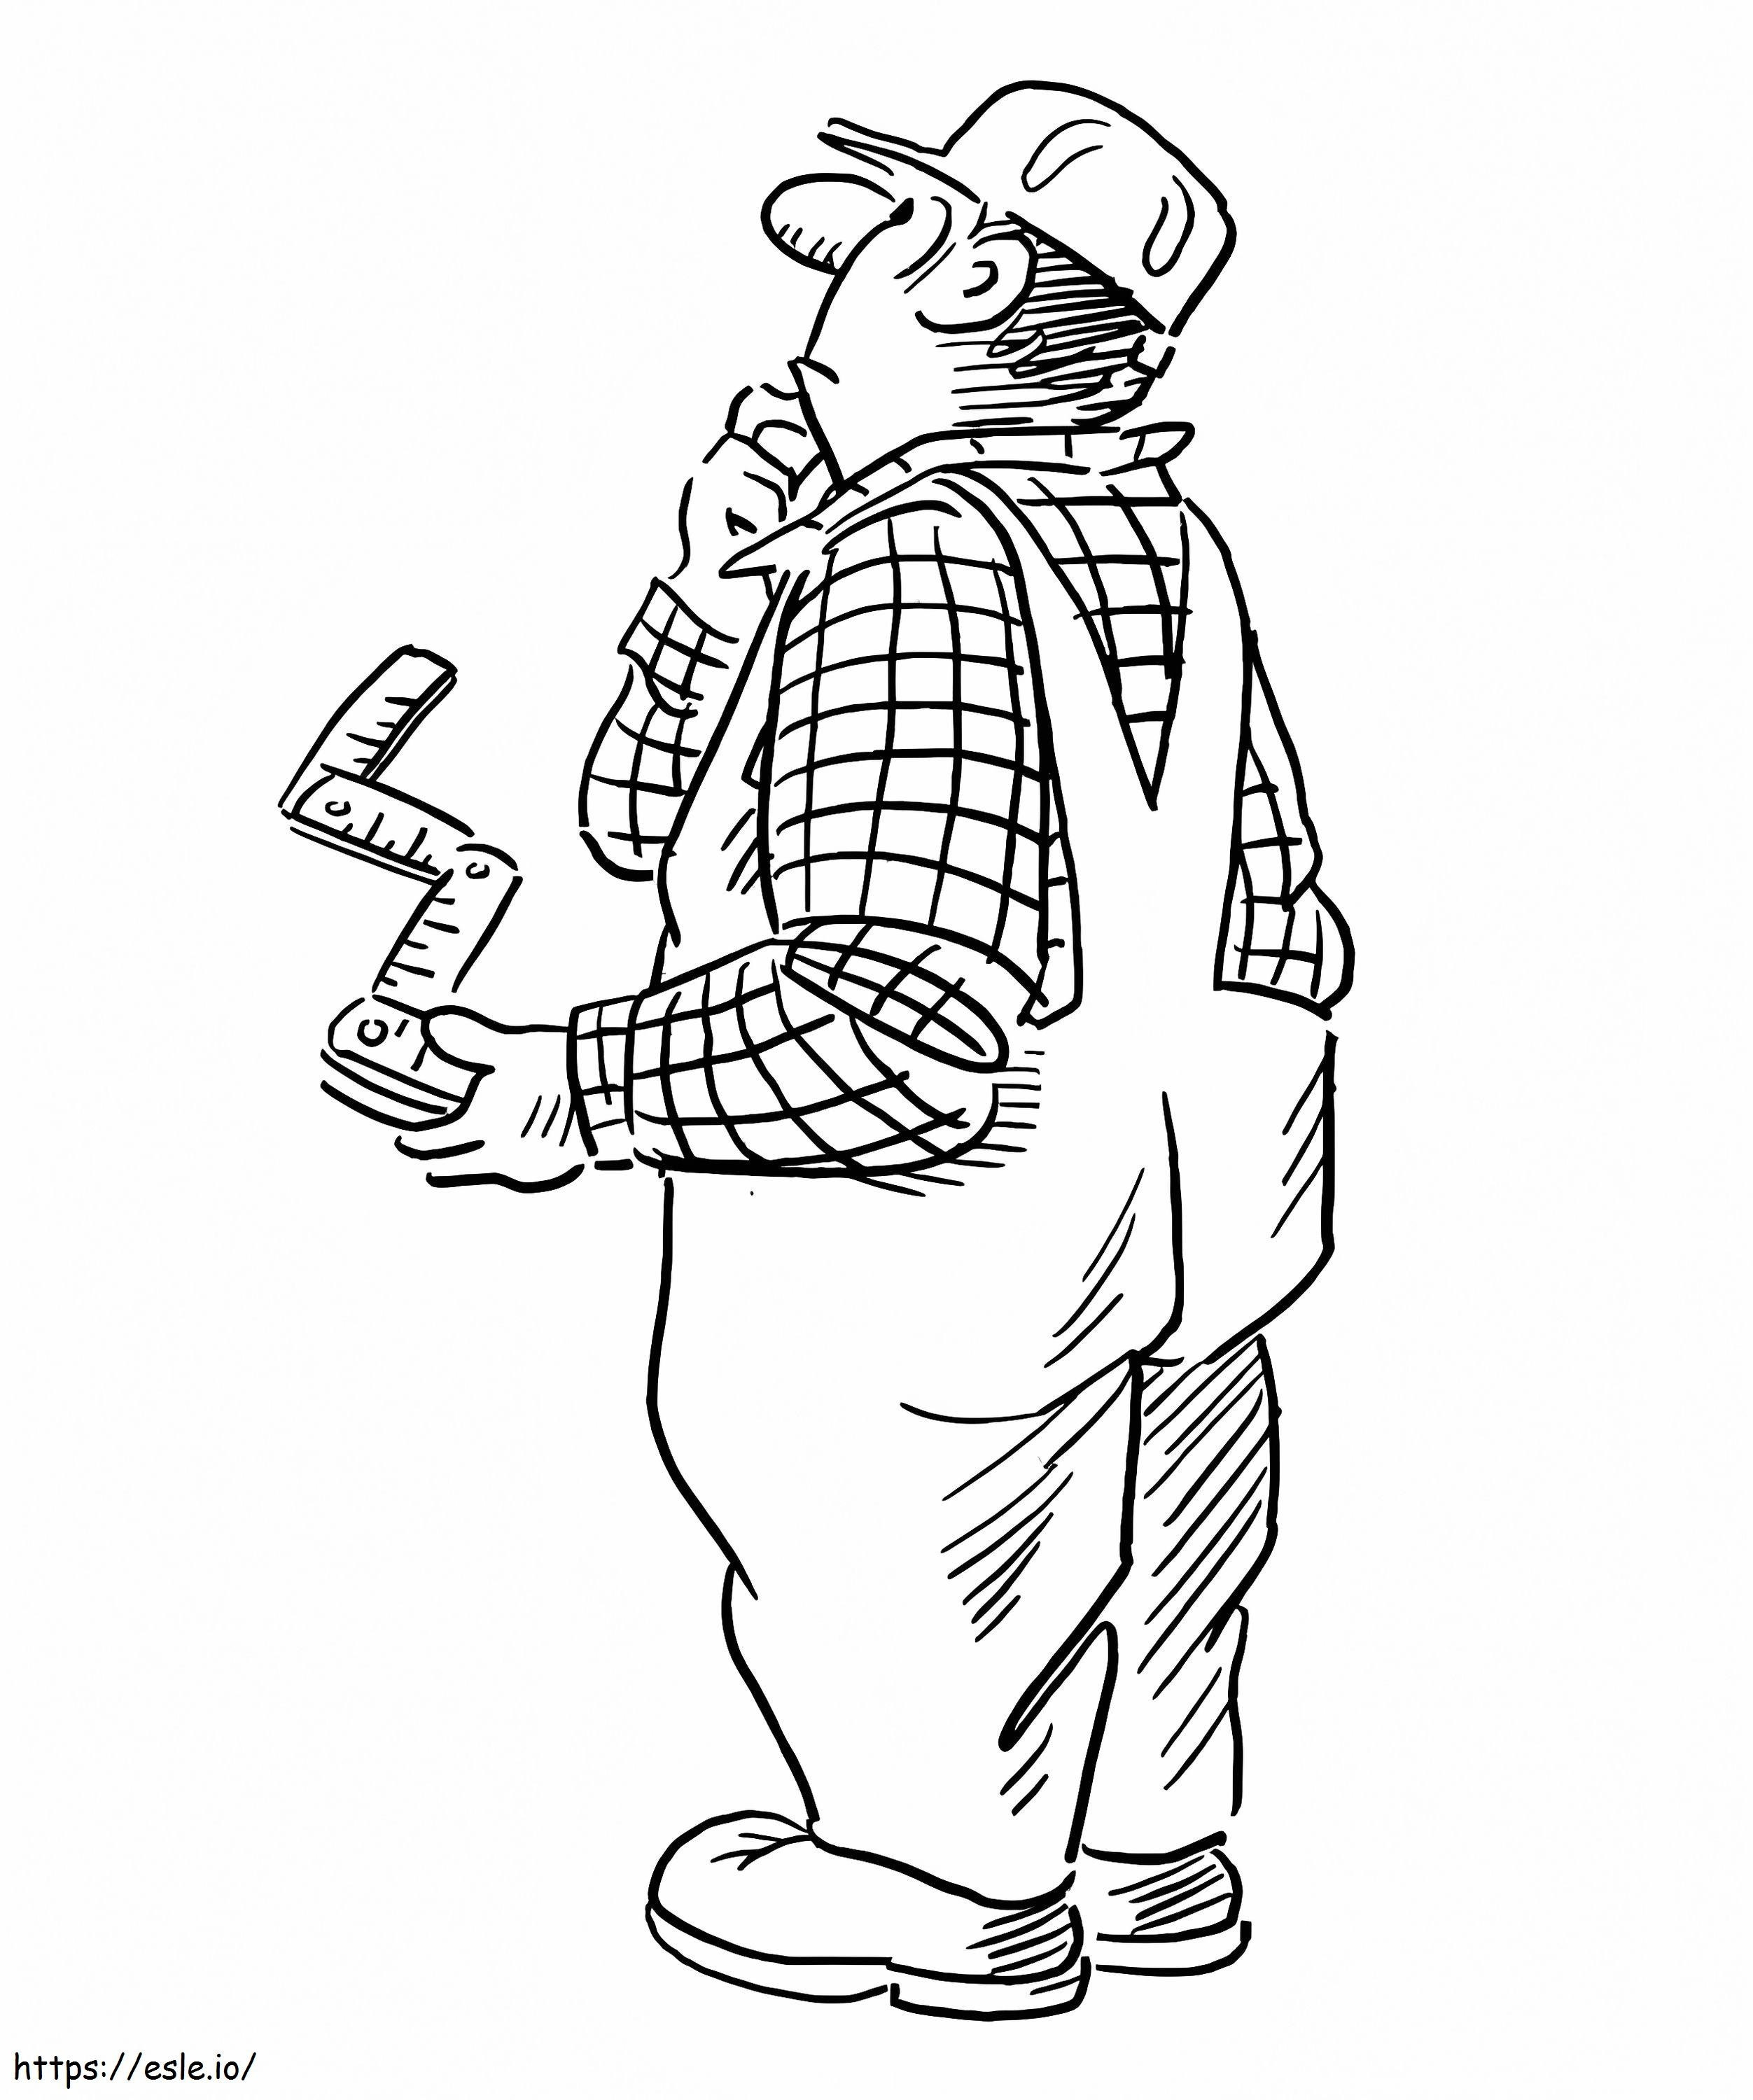 Engineer Is Thinking coloring page